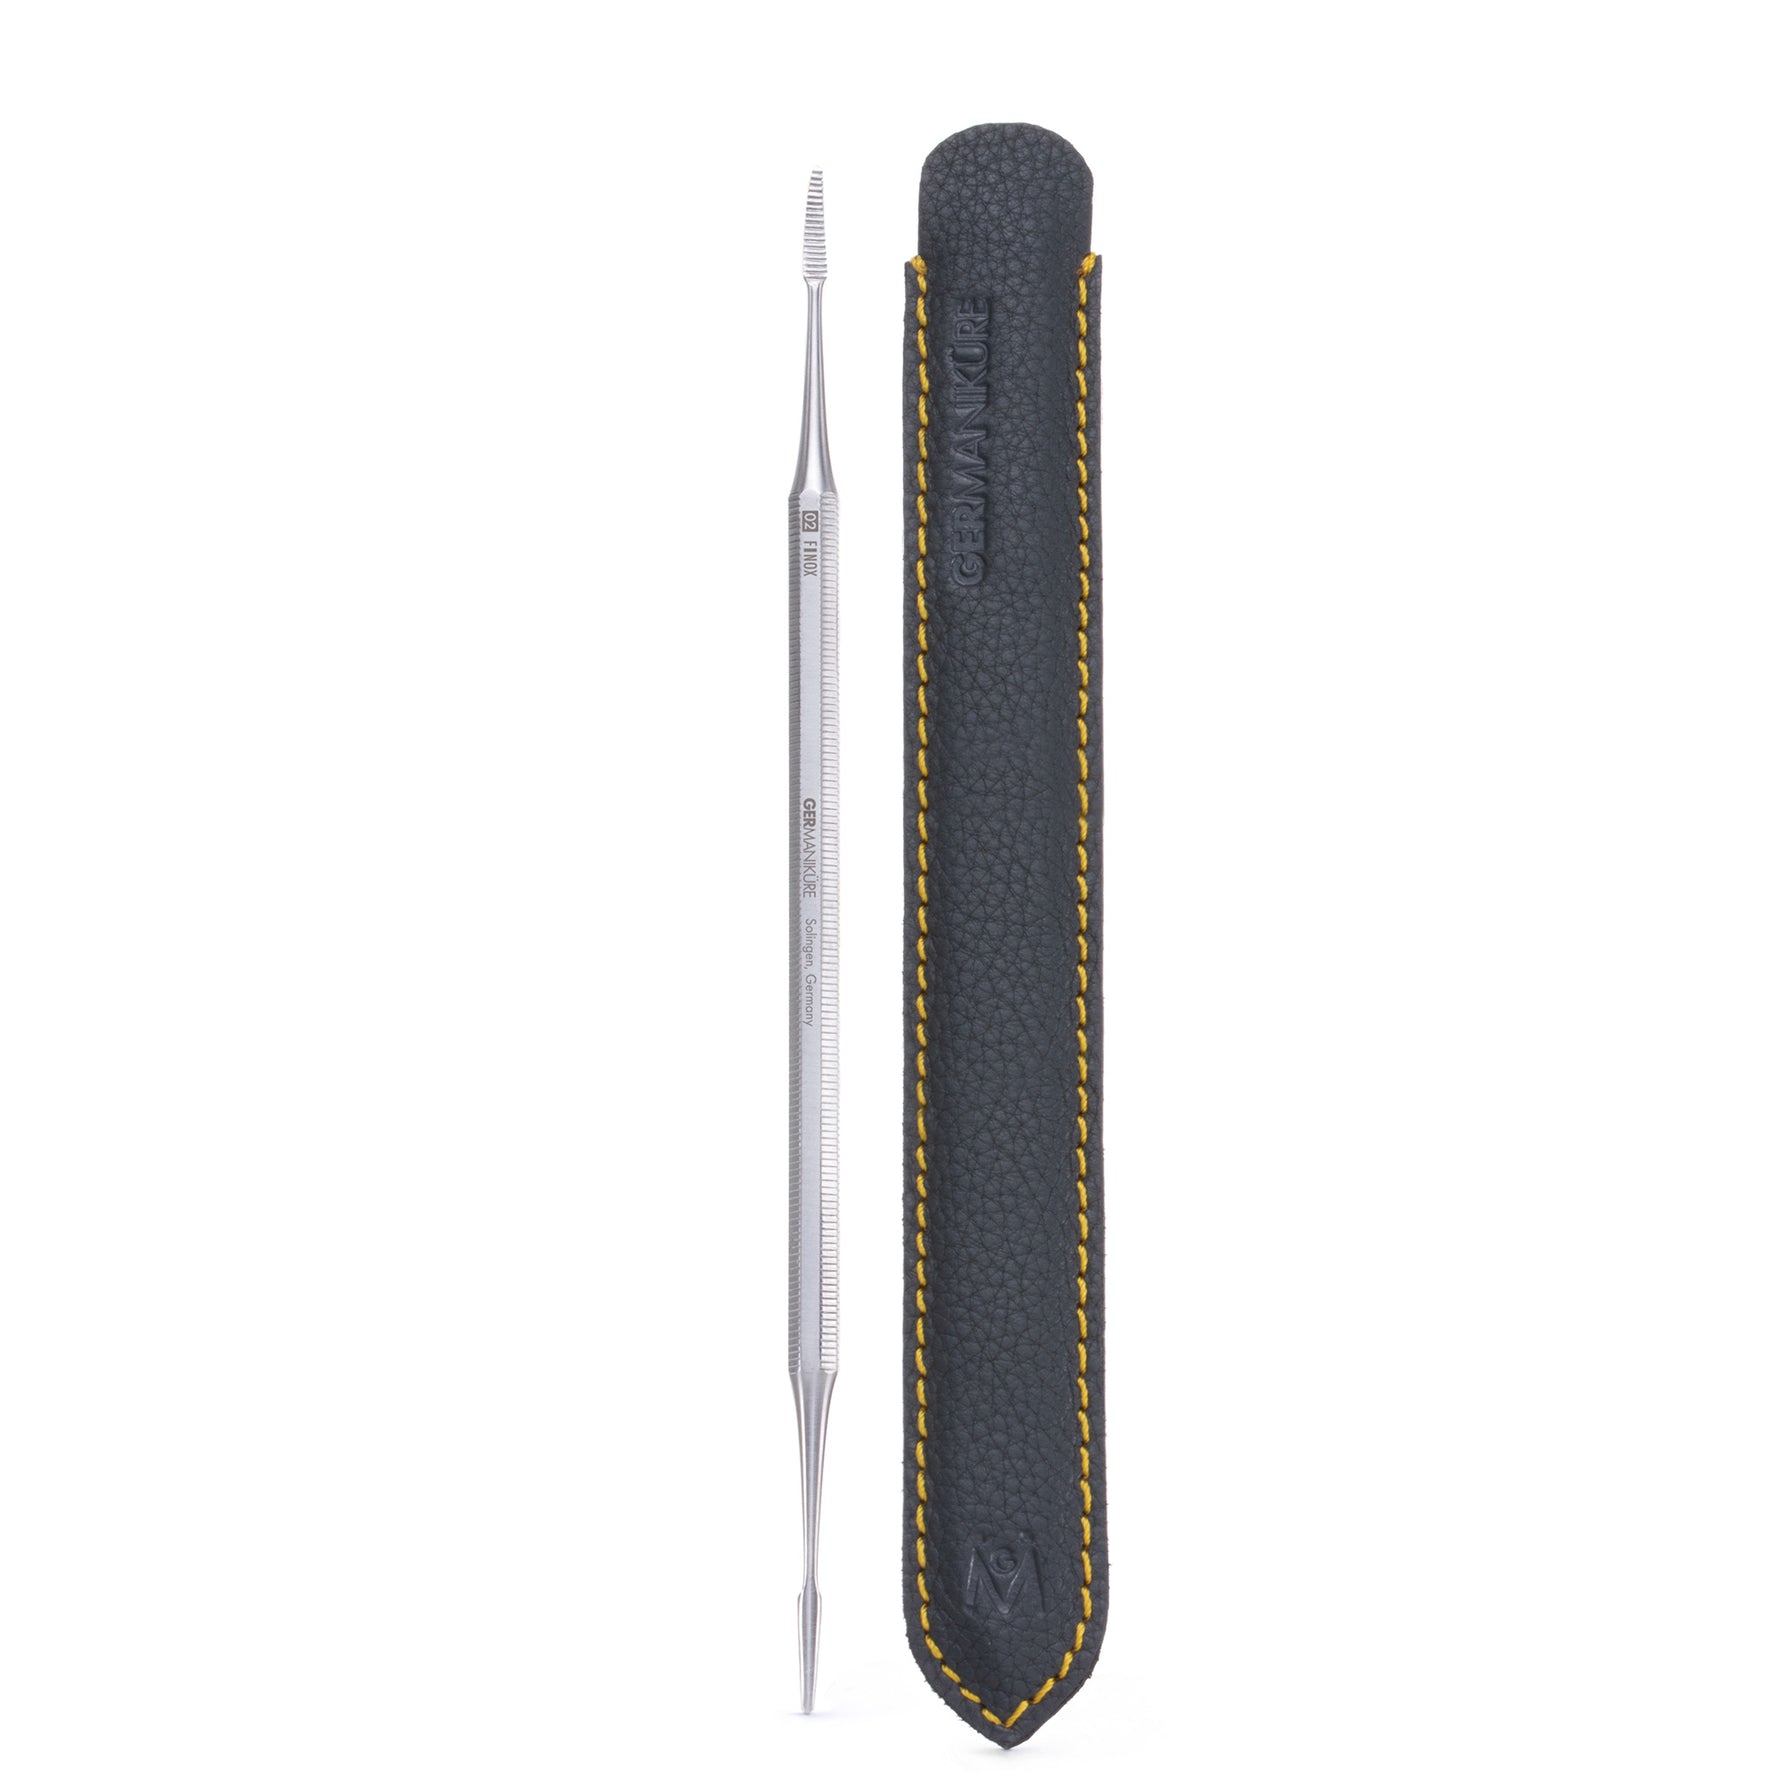 Straight Double Sided Nail File for Ingrown Toenails 